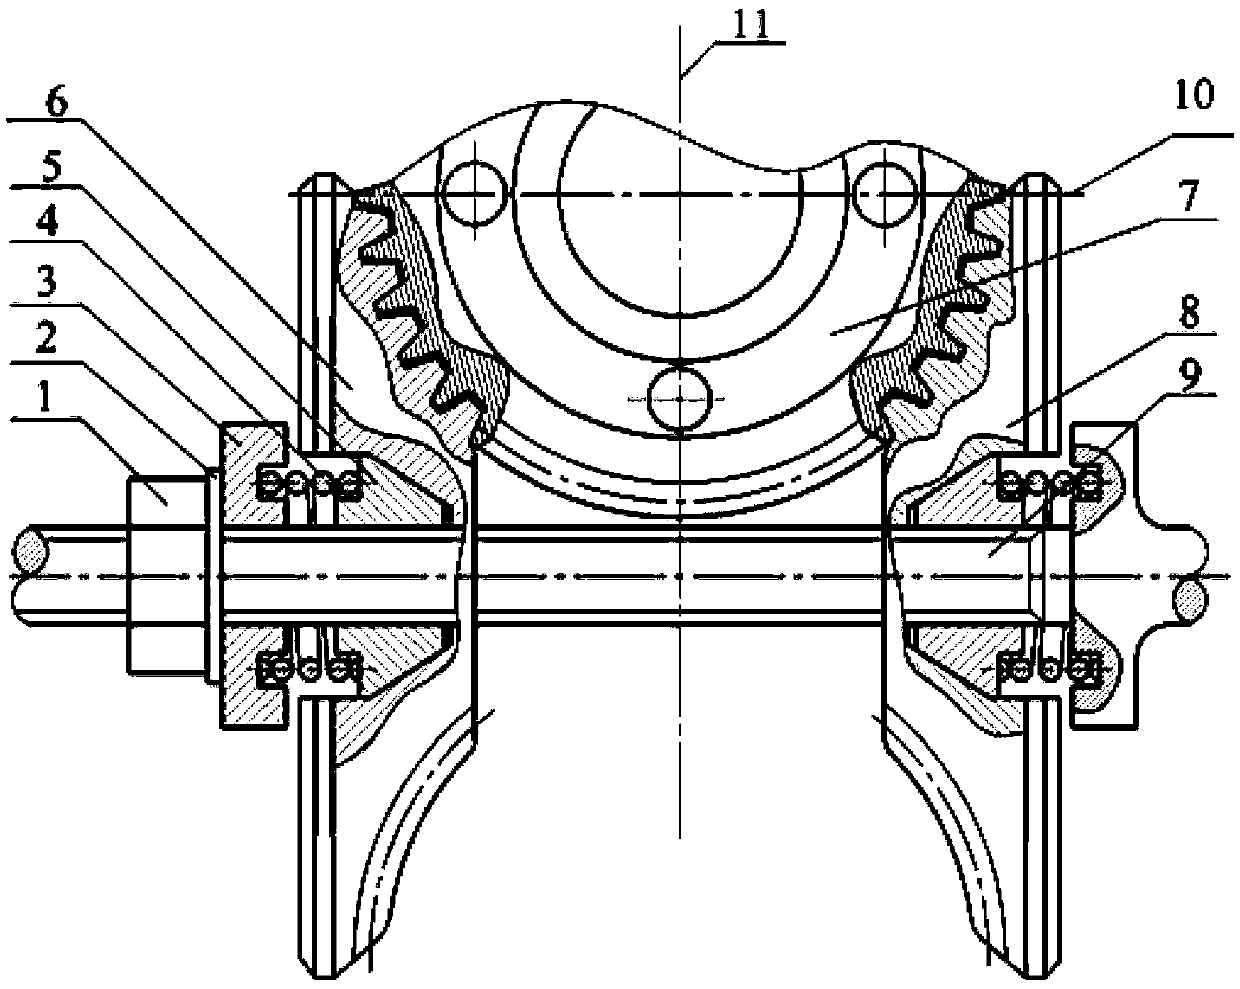 Two-segment enveloping worm end face meshing worm transmission device